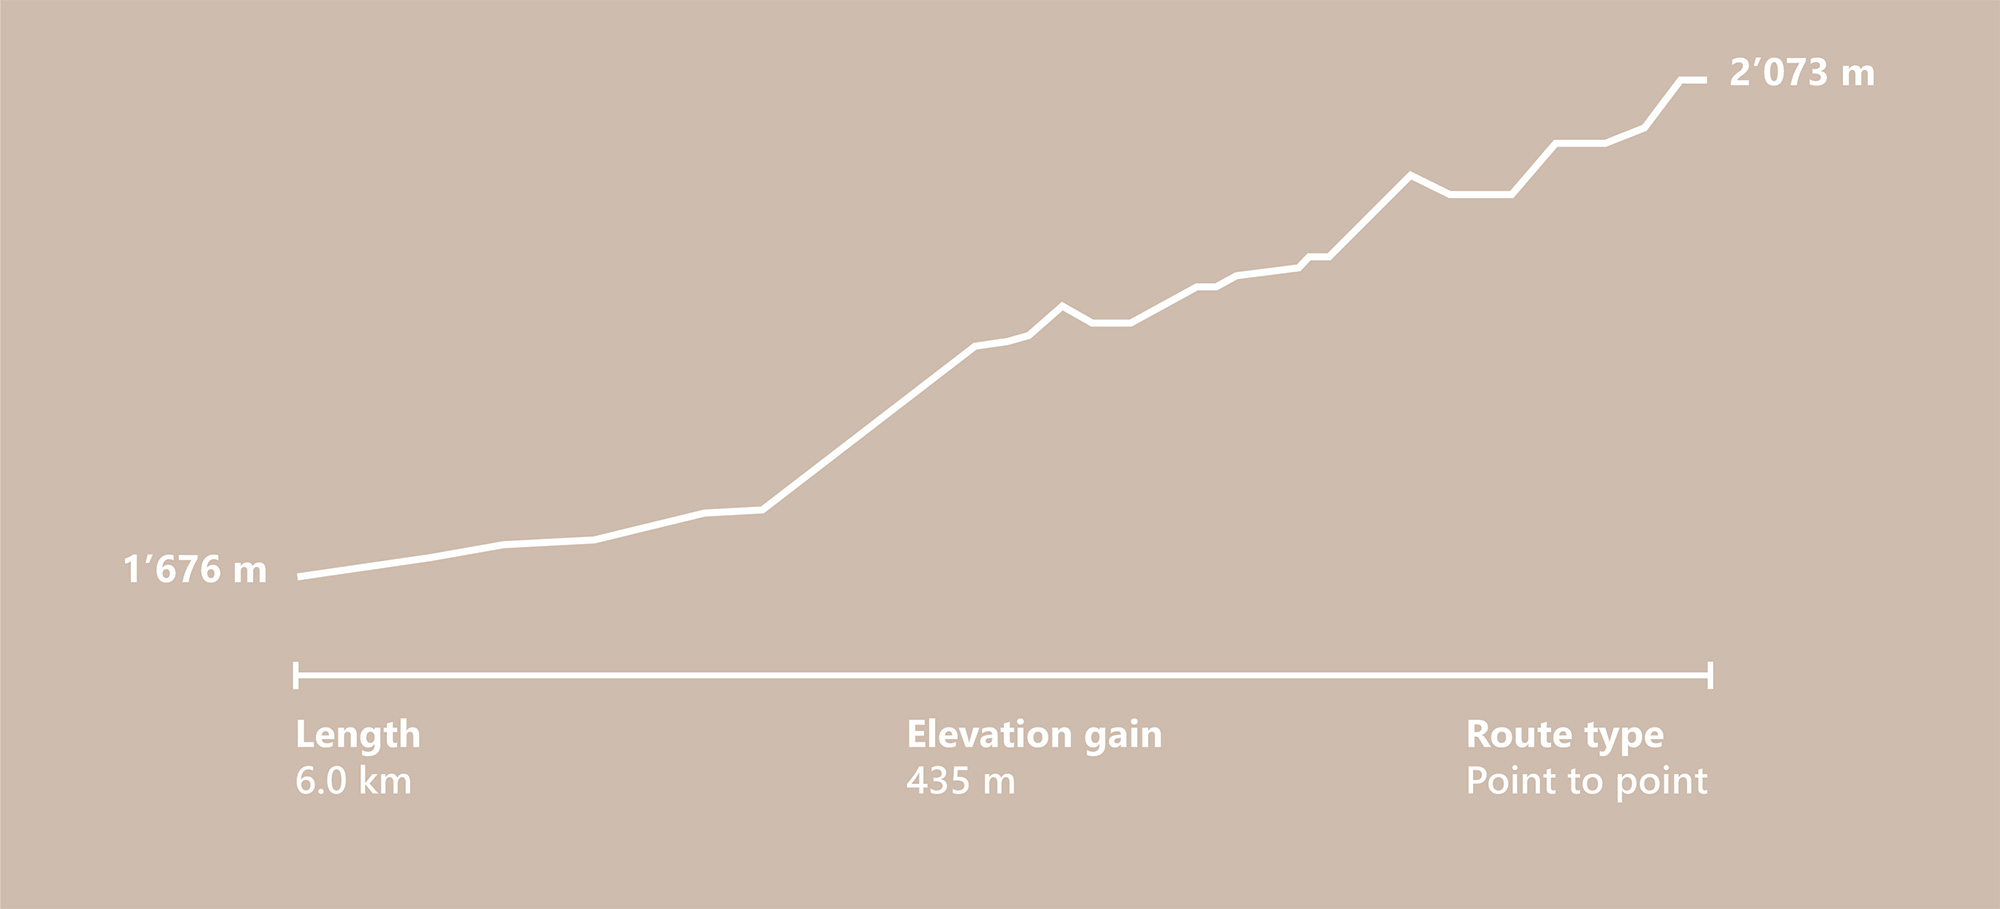 Route and altitude difference for the hike to the Zinal ice cave in Valais, Switzerland.